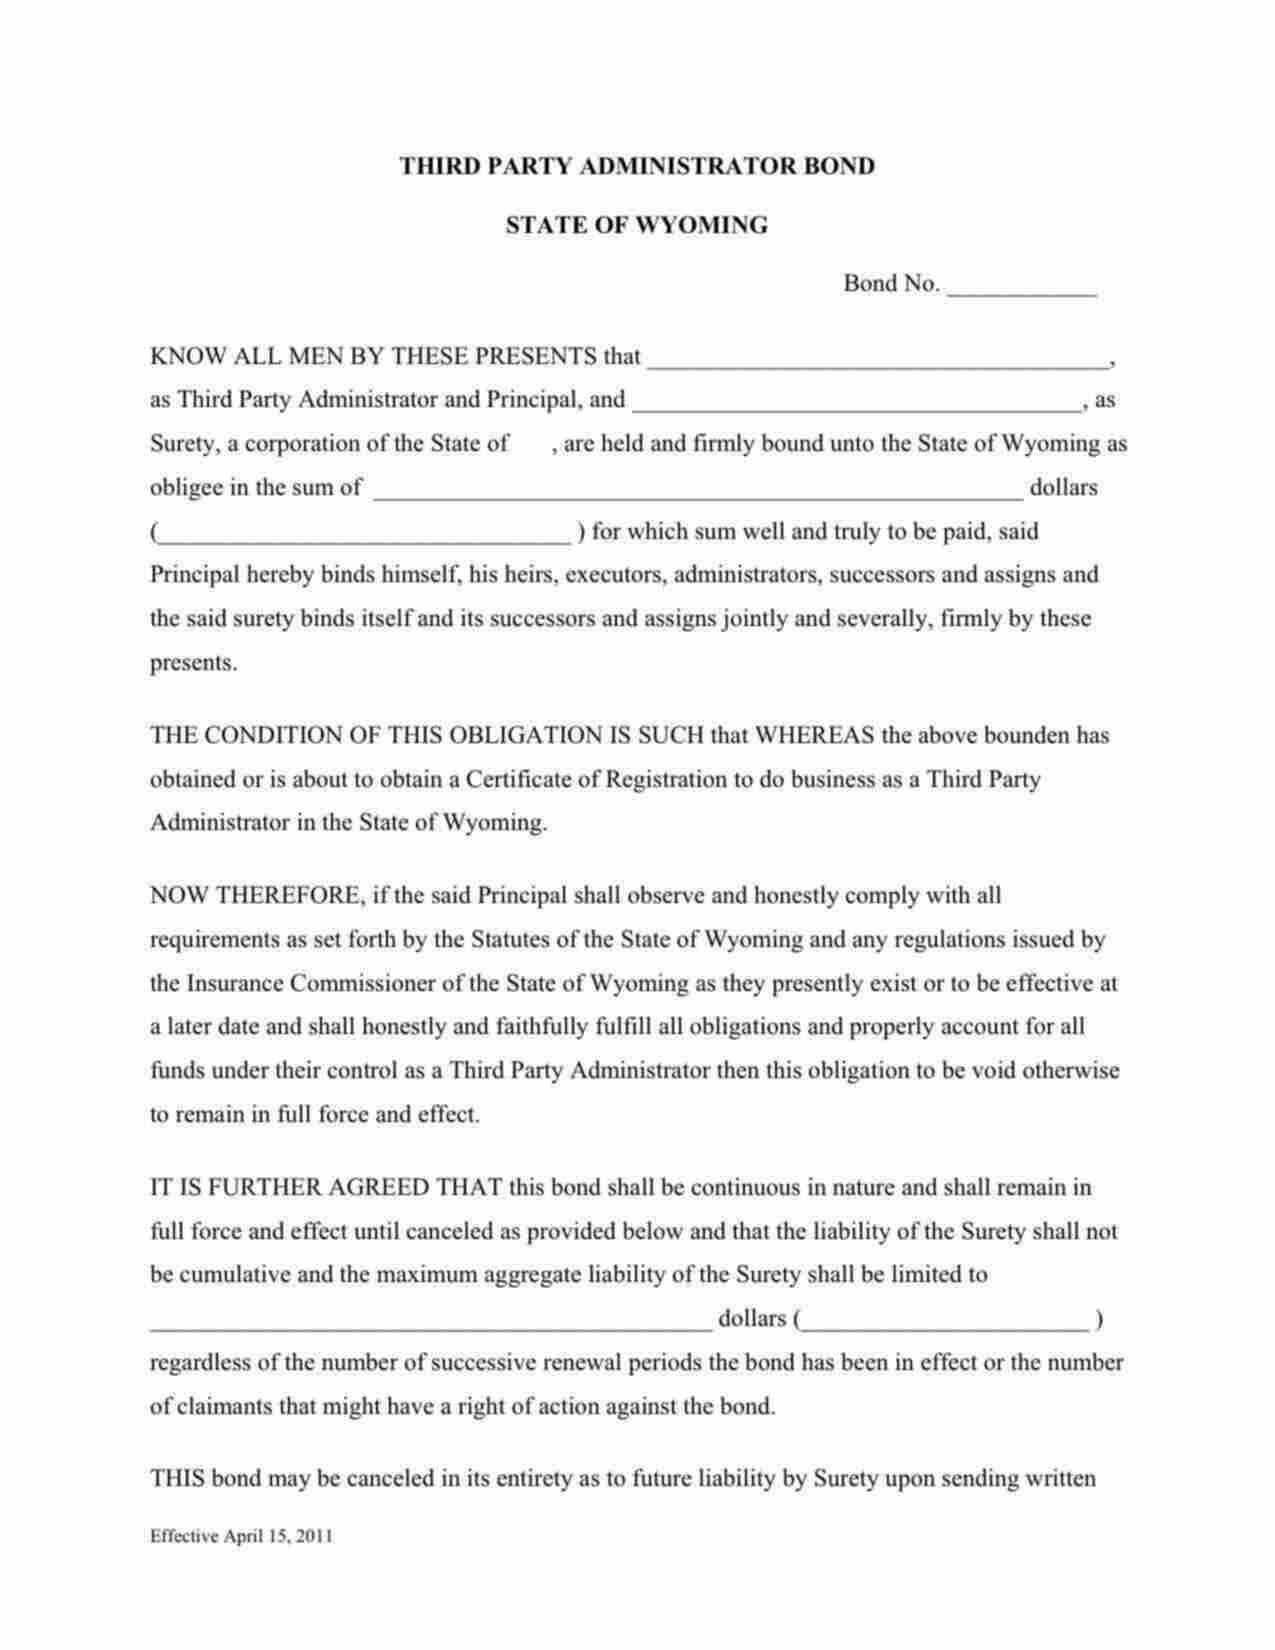 Wyoming Third Party Administrator Bond Form